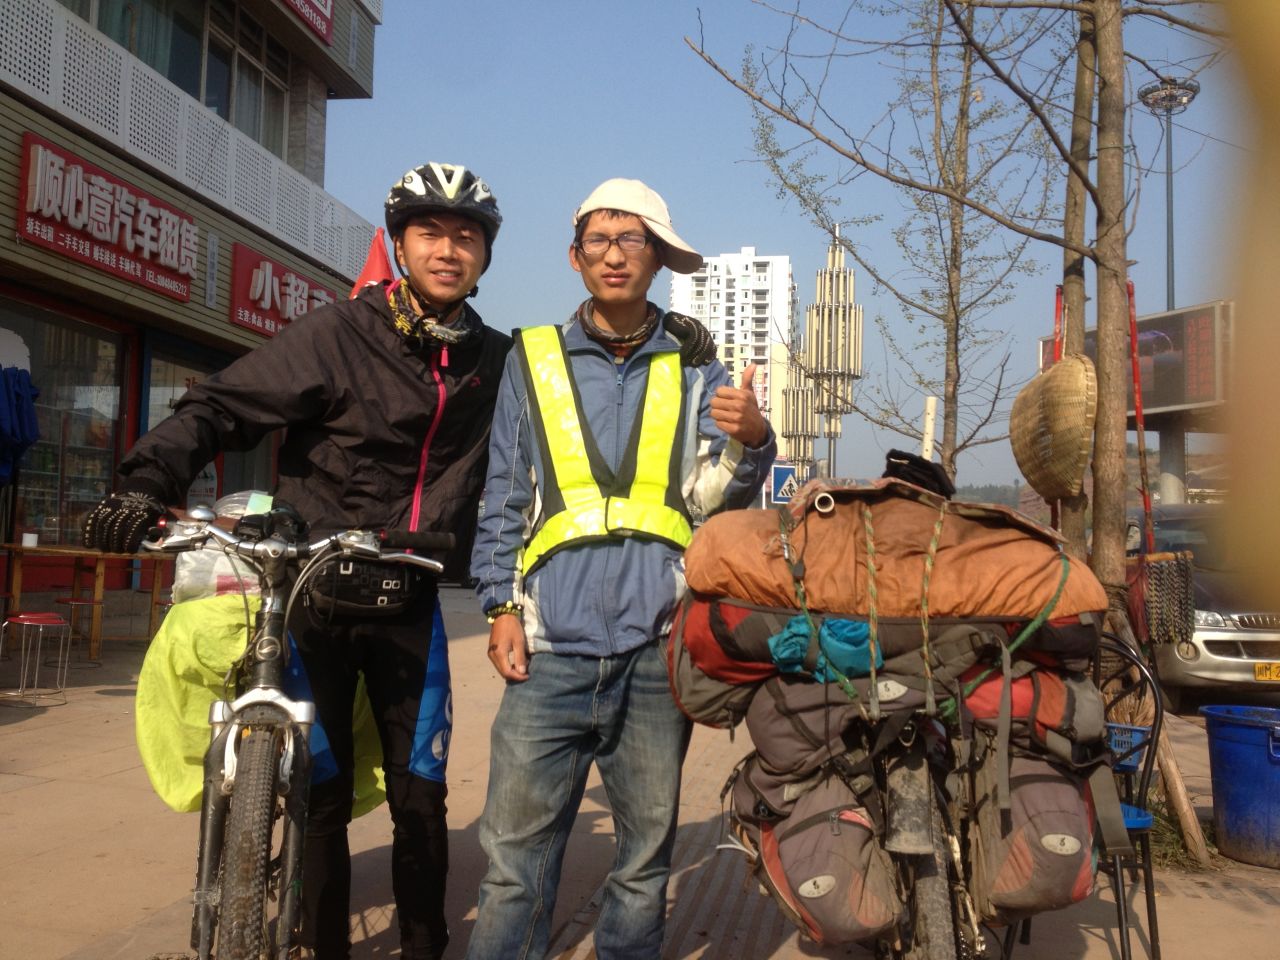 Wang (right) stretched a paltry budget of just more than $100 with help from friends along the route.